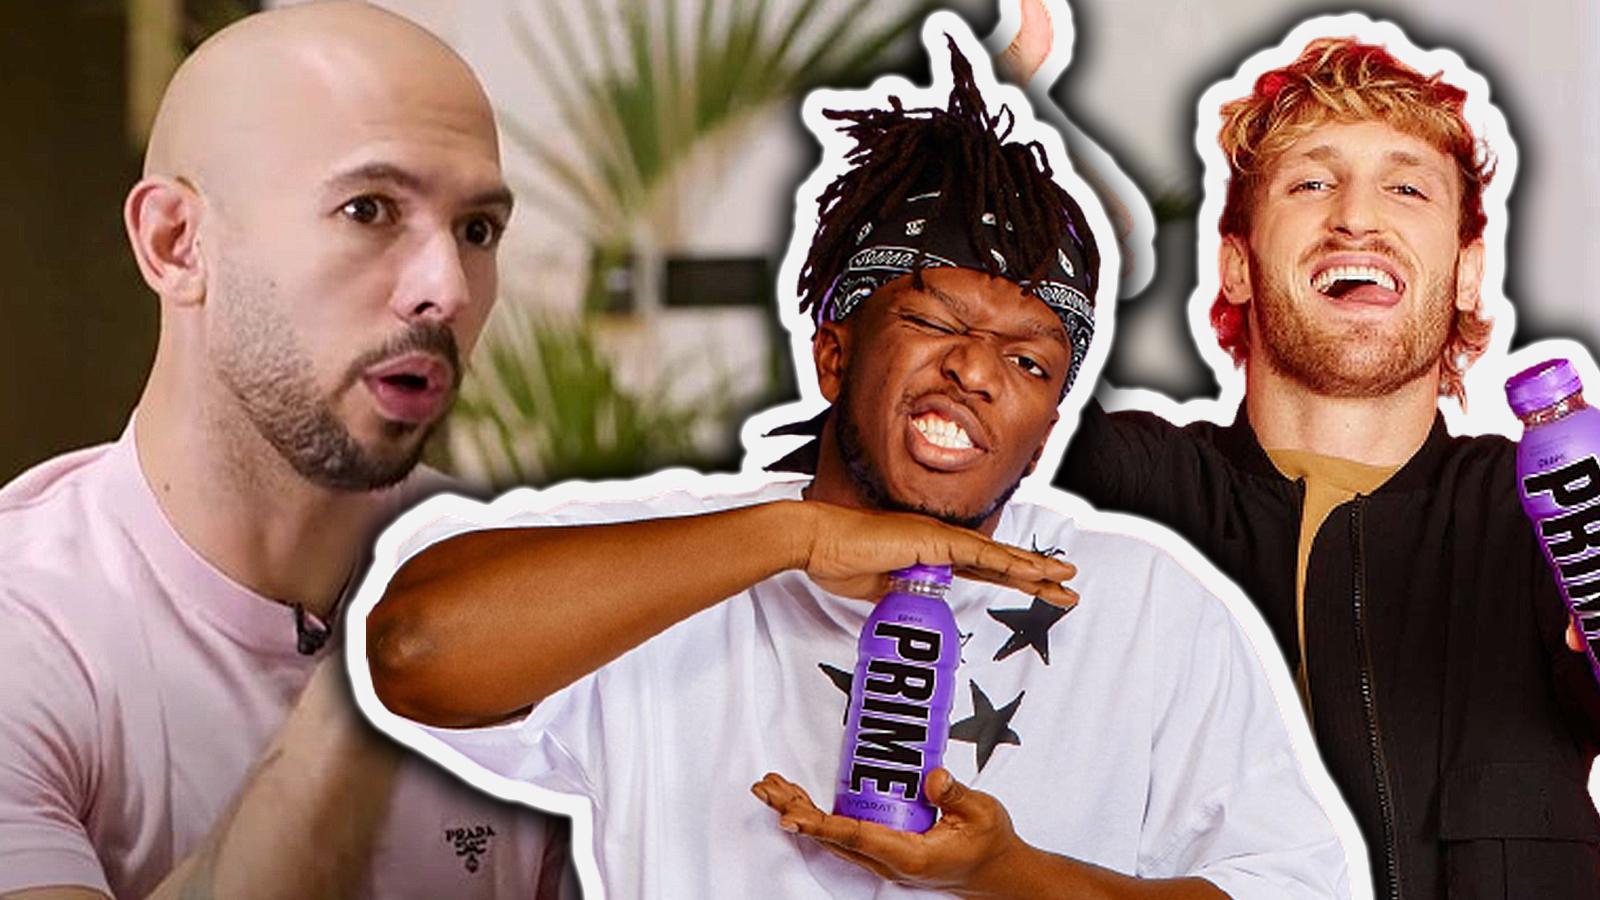 KSI and Logan Paul's Prime drink to 'finally' be sold at Tesco after shop  feared for security measures